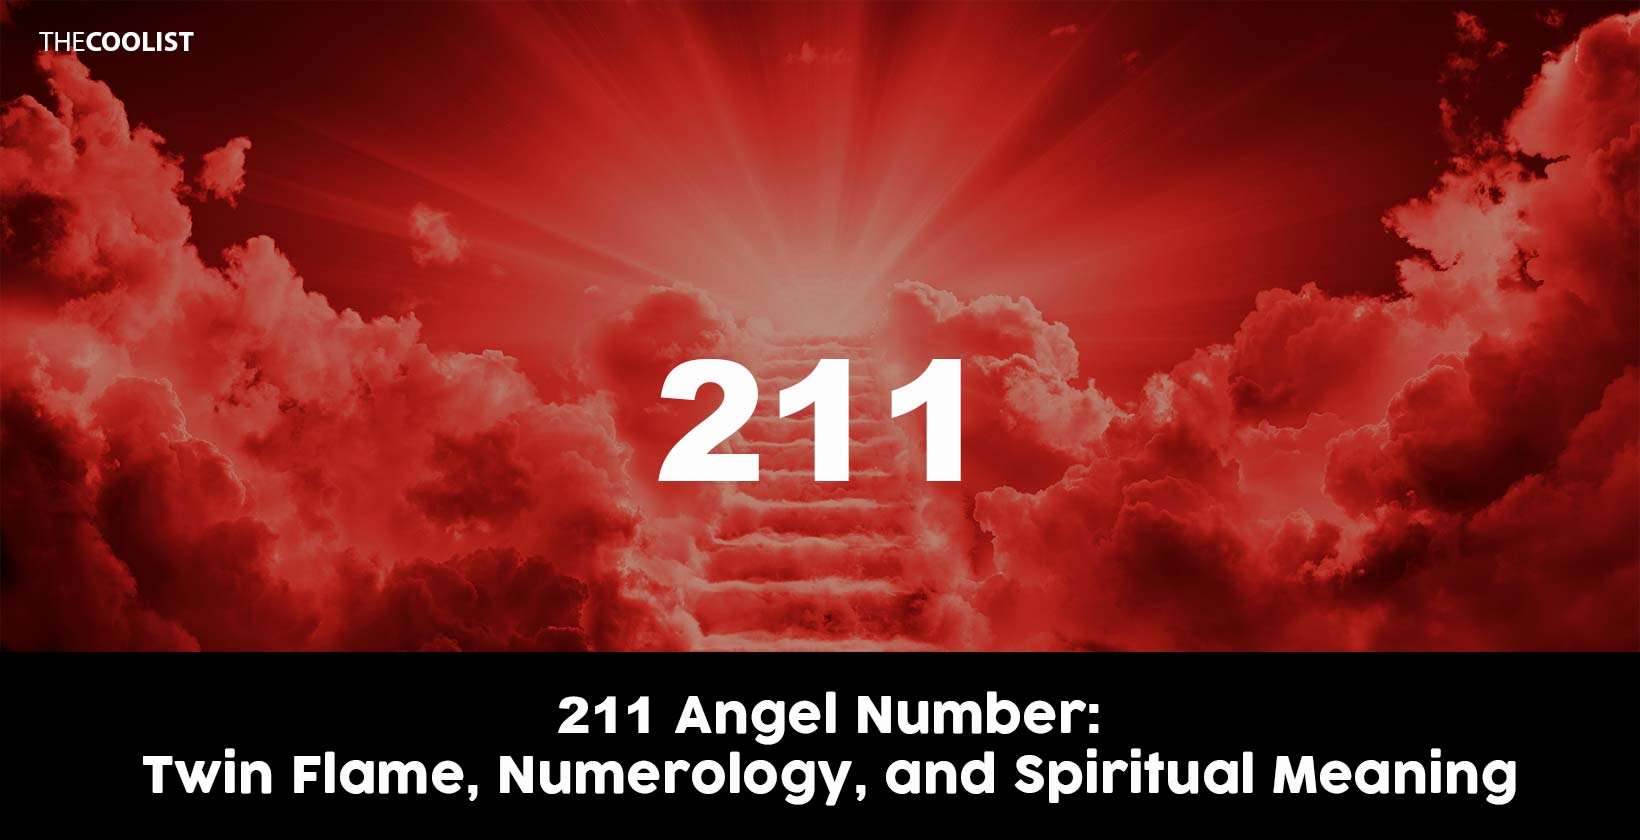 211 Angel Number: Twin Flame, Numerology, and Spiritual Meaning